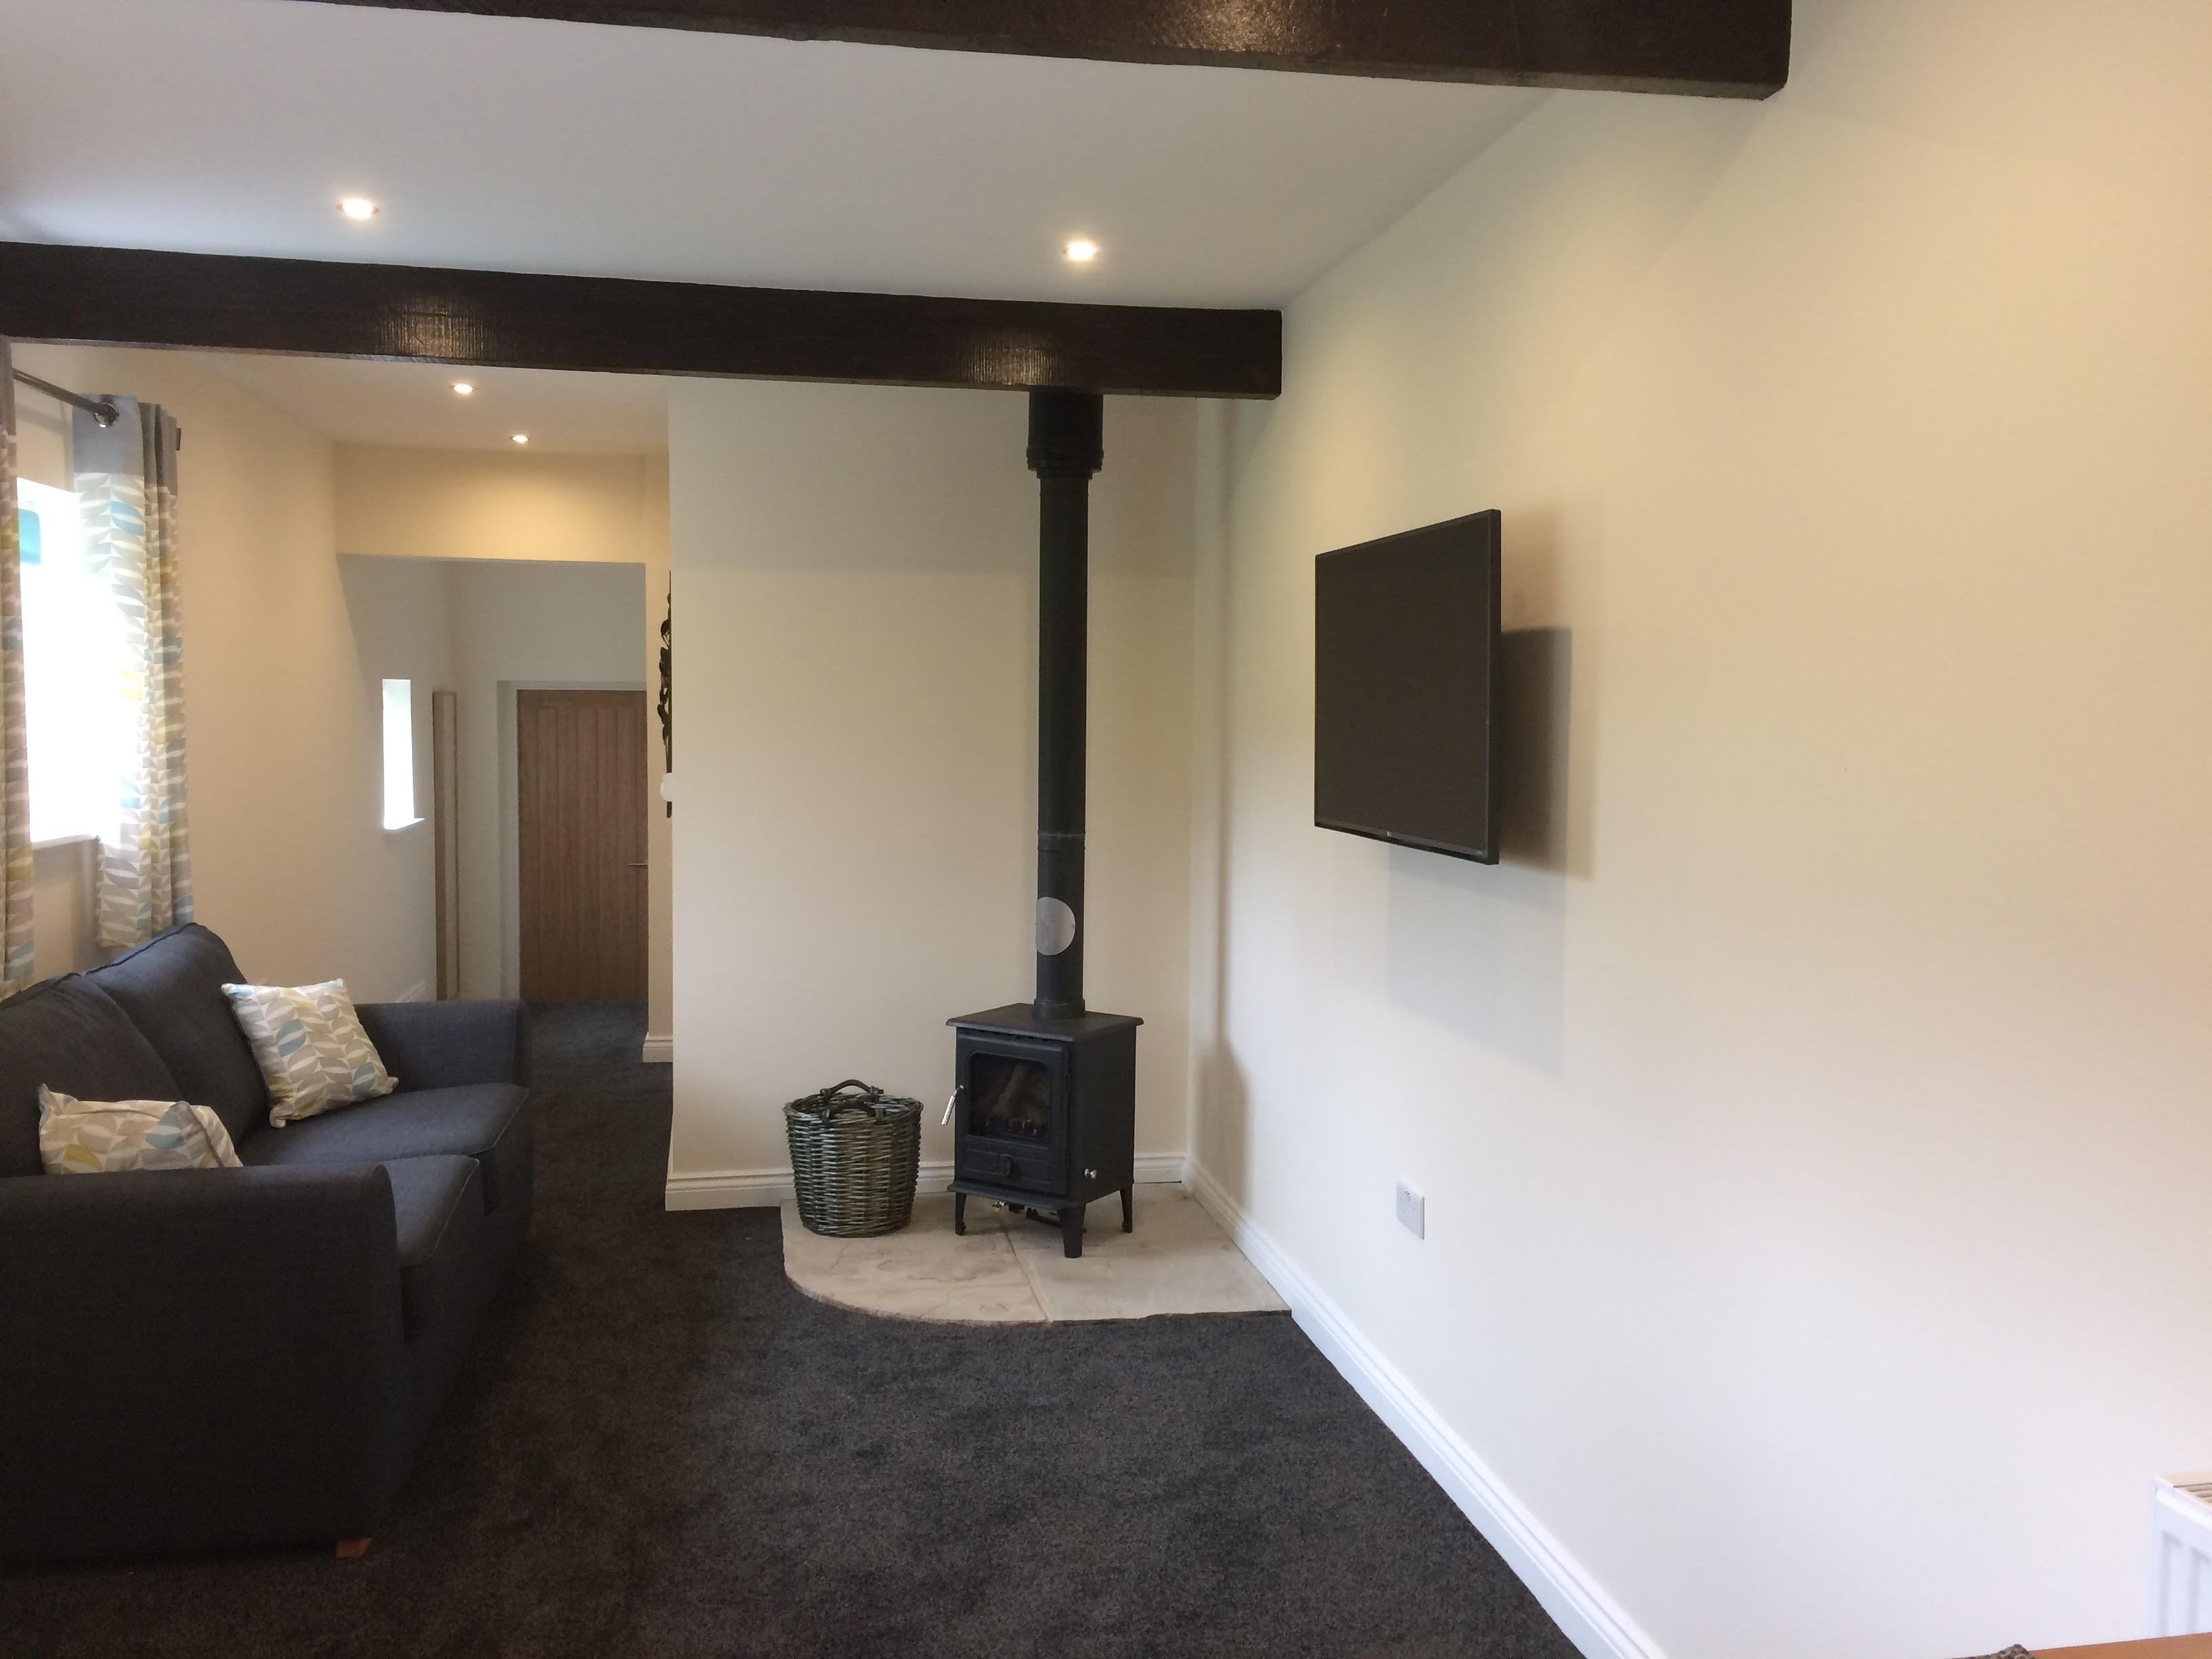 Living room area showing a comfy blue sofa, wood burning stove and HD Television